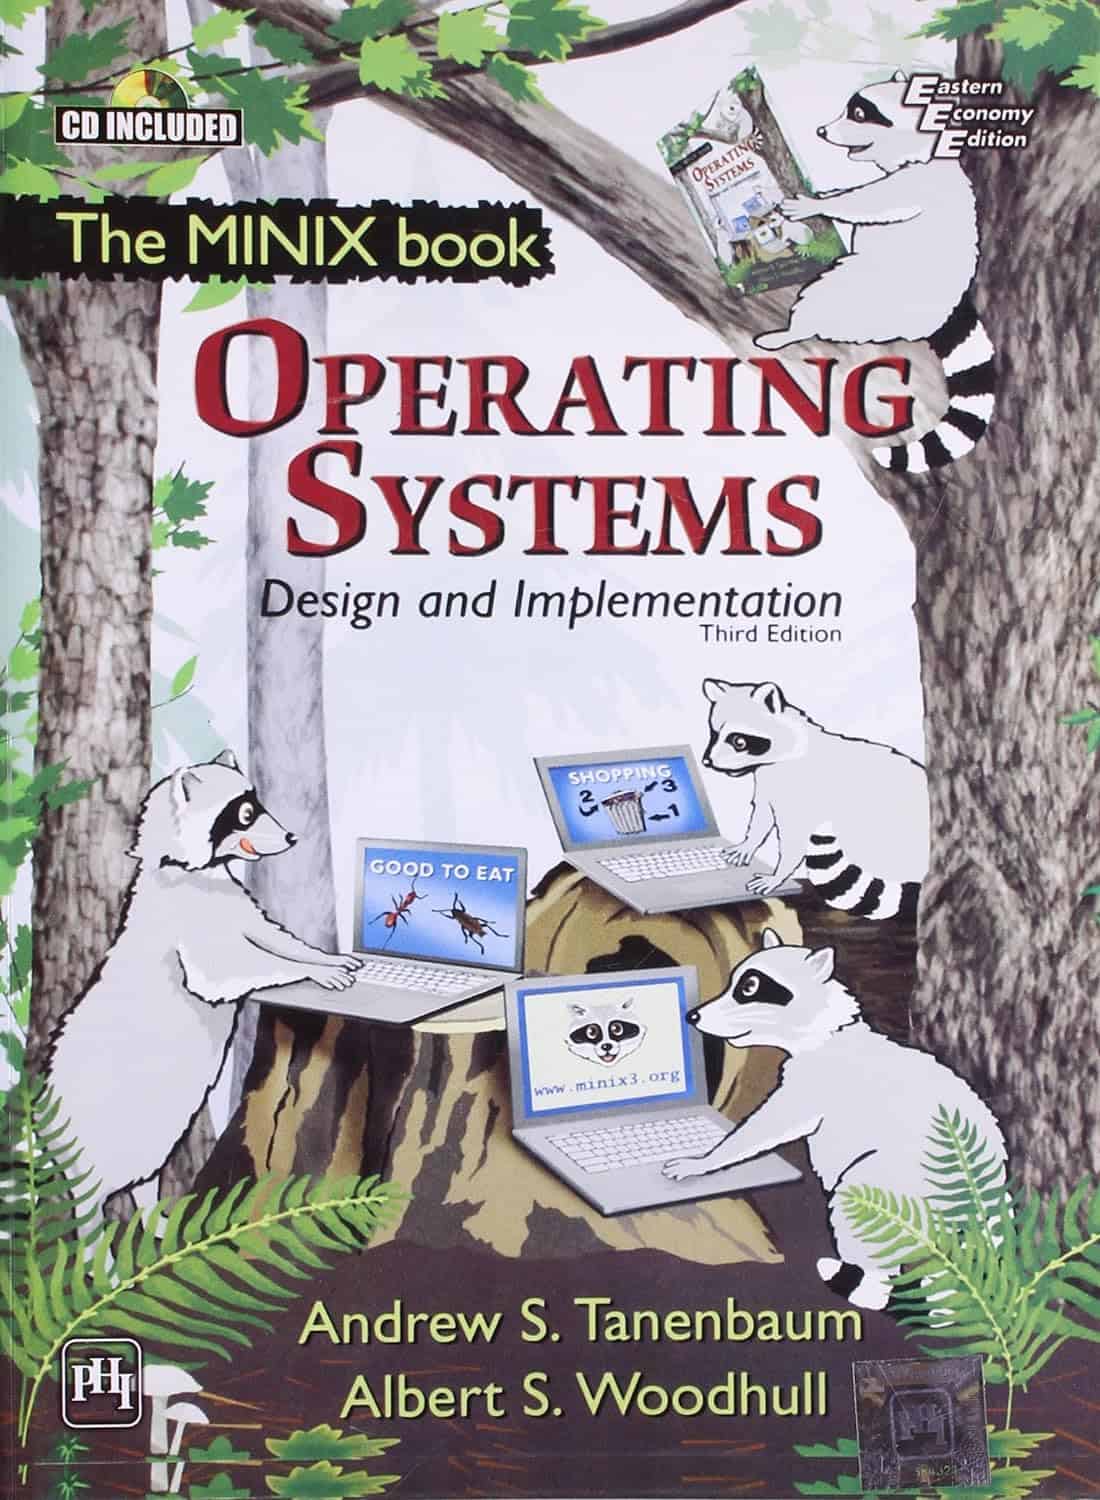 The cover of 'Operating Systems: Design and Implementation'